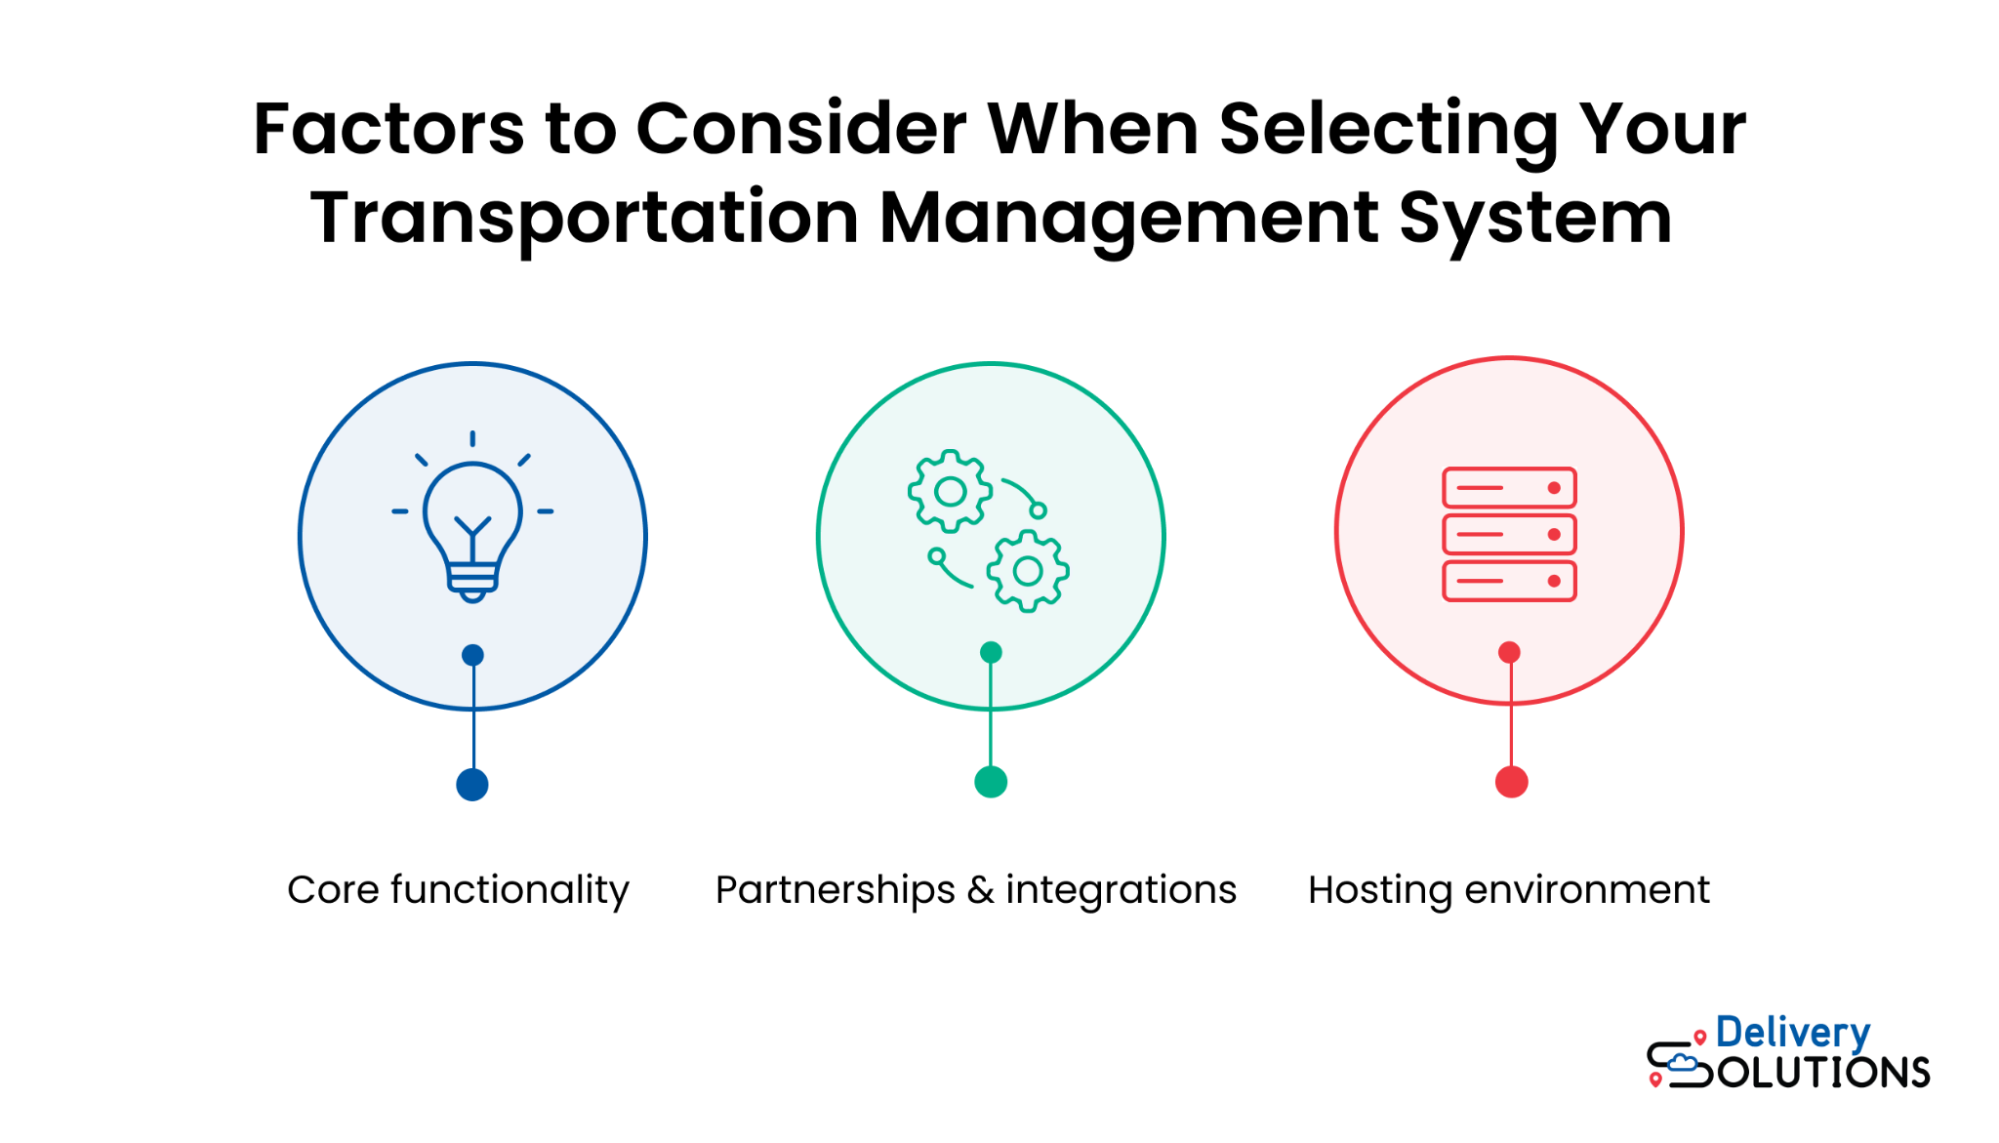 Three main factors for selecting a transportation management system